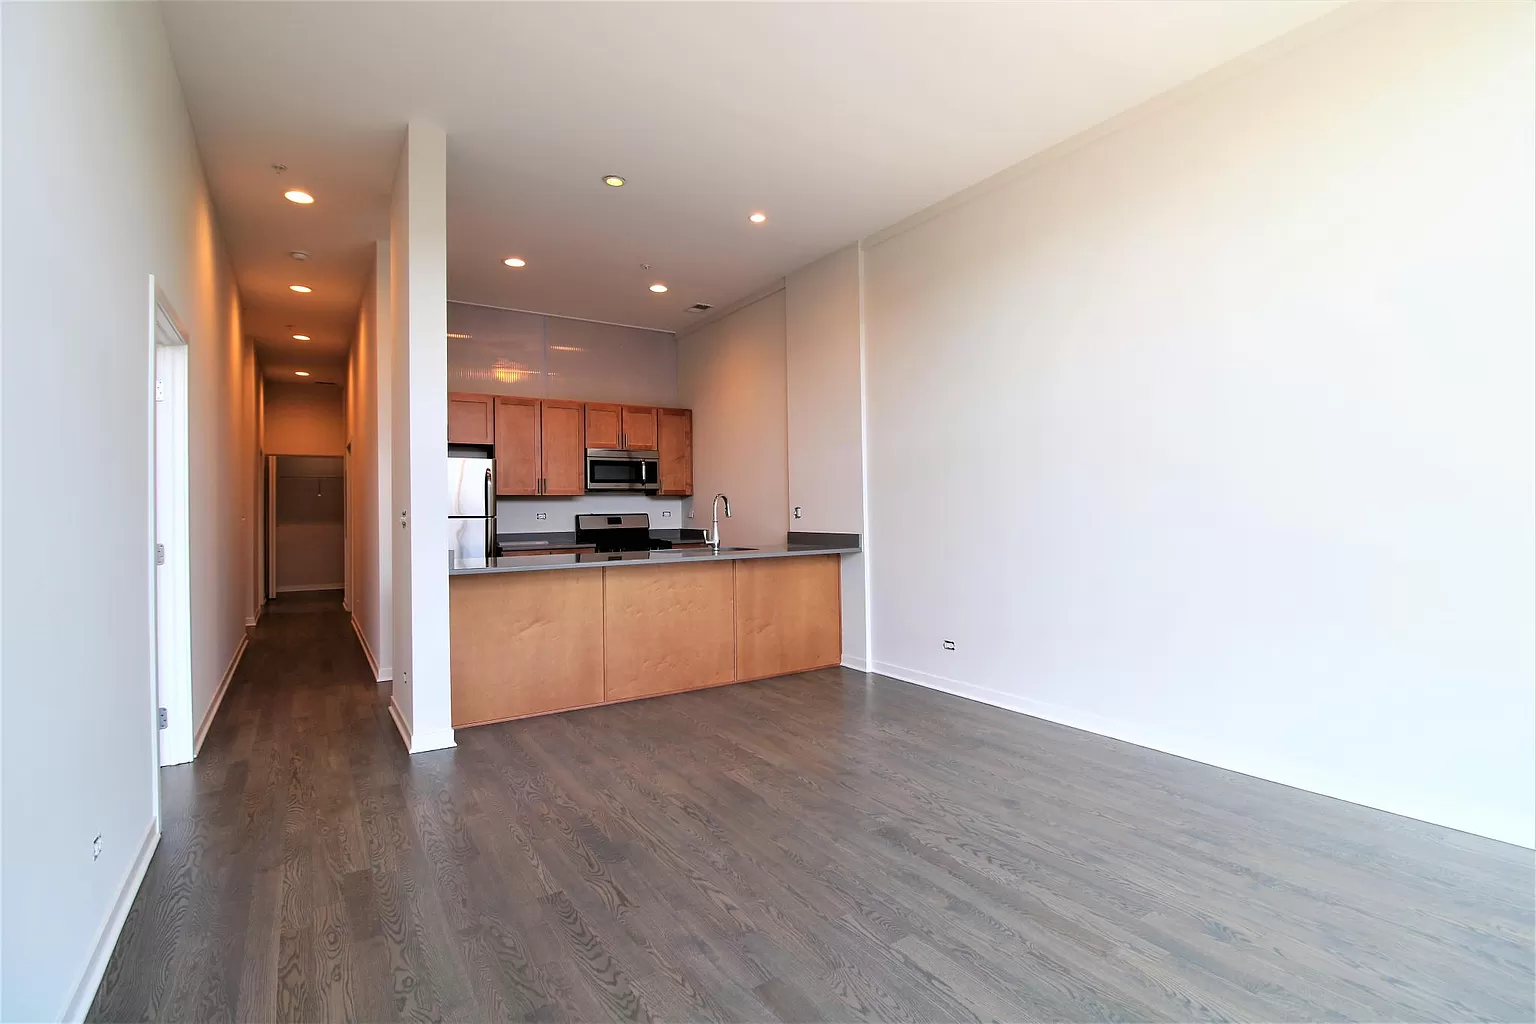 Argosy University-Chicago Housing 2.5 Bed 2 bath apartment - Available for lease takeover or looking for a room mate for Argosy University-Chicago Students in Chicago, IL